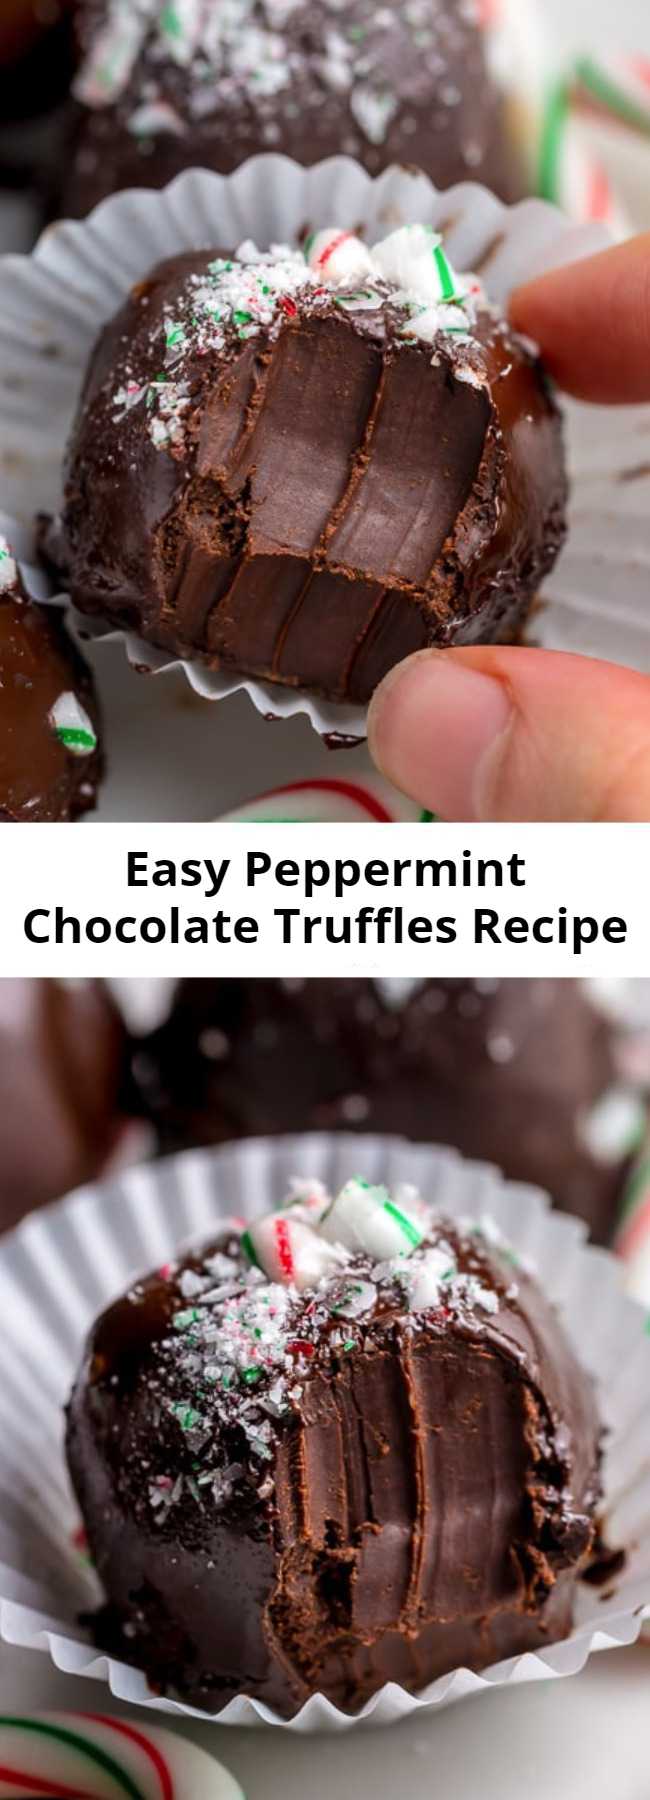 Easy Peppermint Chocolate Truffles Recipe - Rich and Creamy Peppermint Chocolate Truffles are made with just 5 simple ingredients! These homemade truffles are so easy and perfect for homemade holiday gifts! Use dark chocolate or white chocolate!